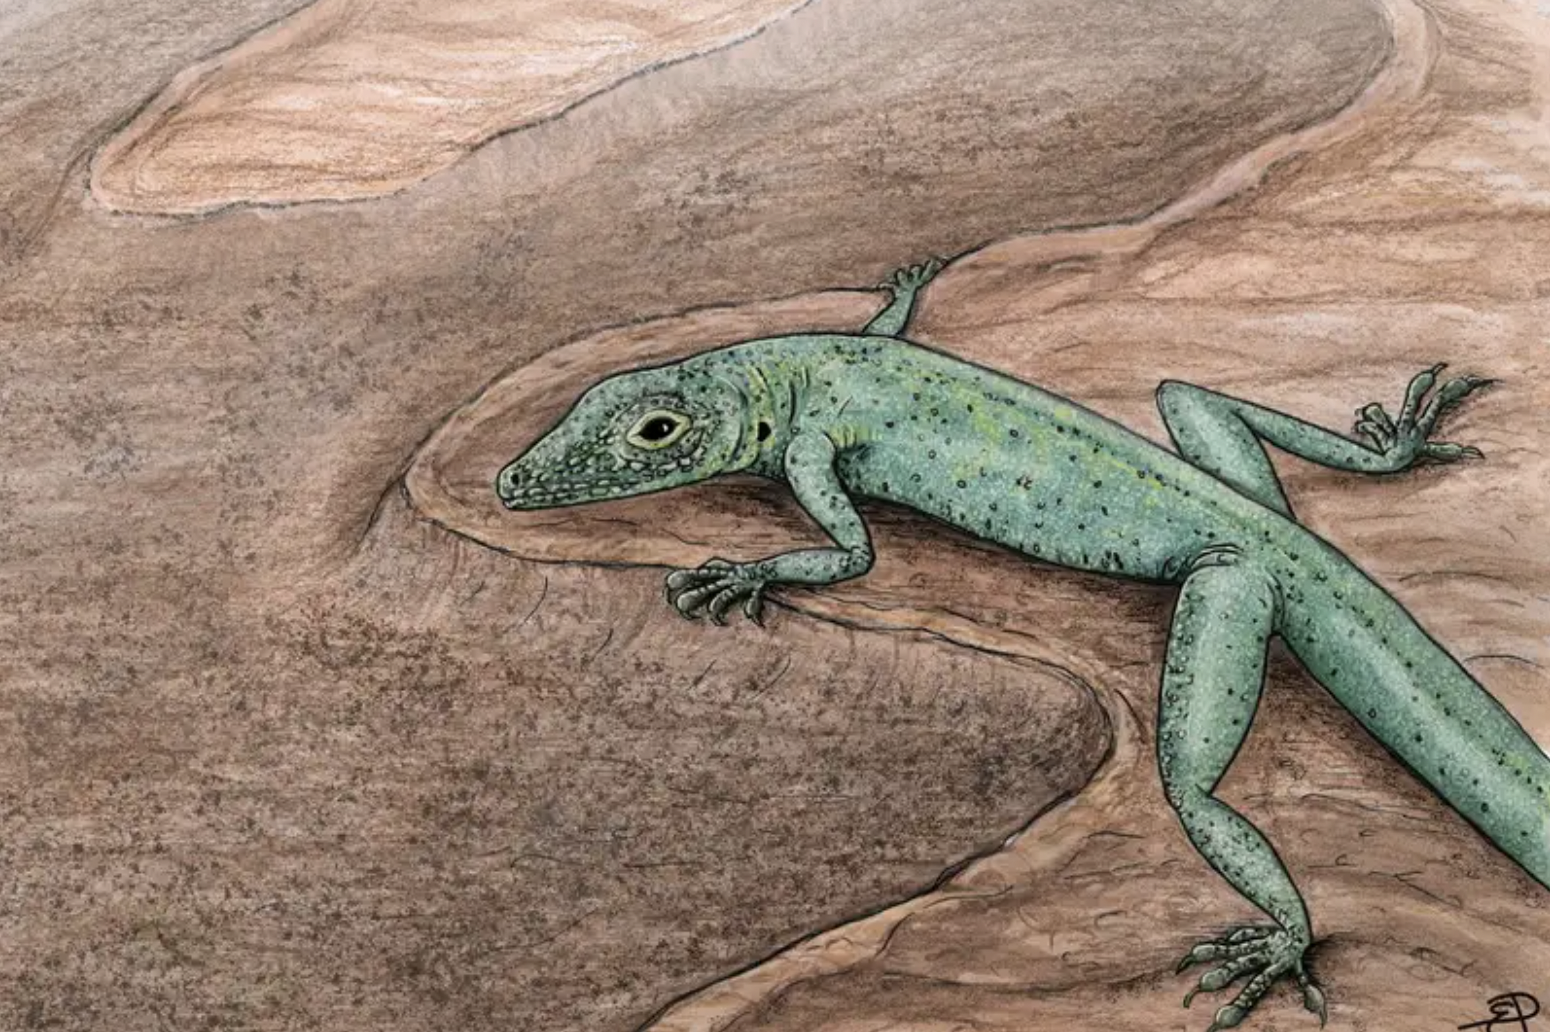 A Scottish fossil is helping scientists fill the gaps in the lizard family tree